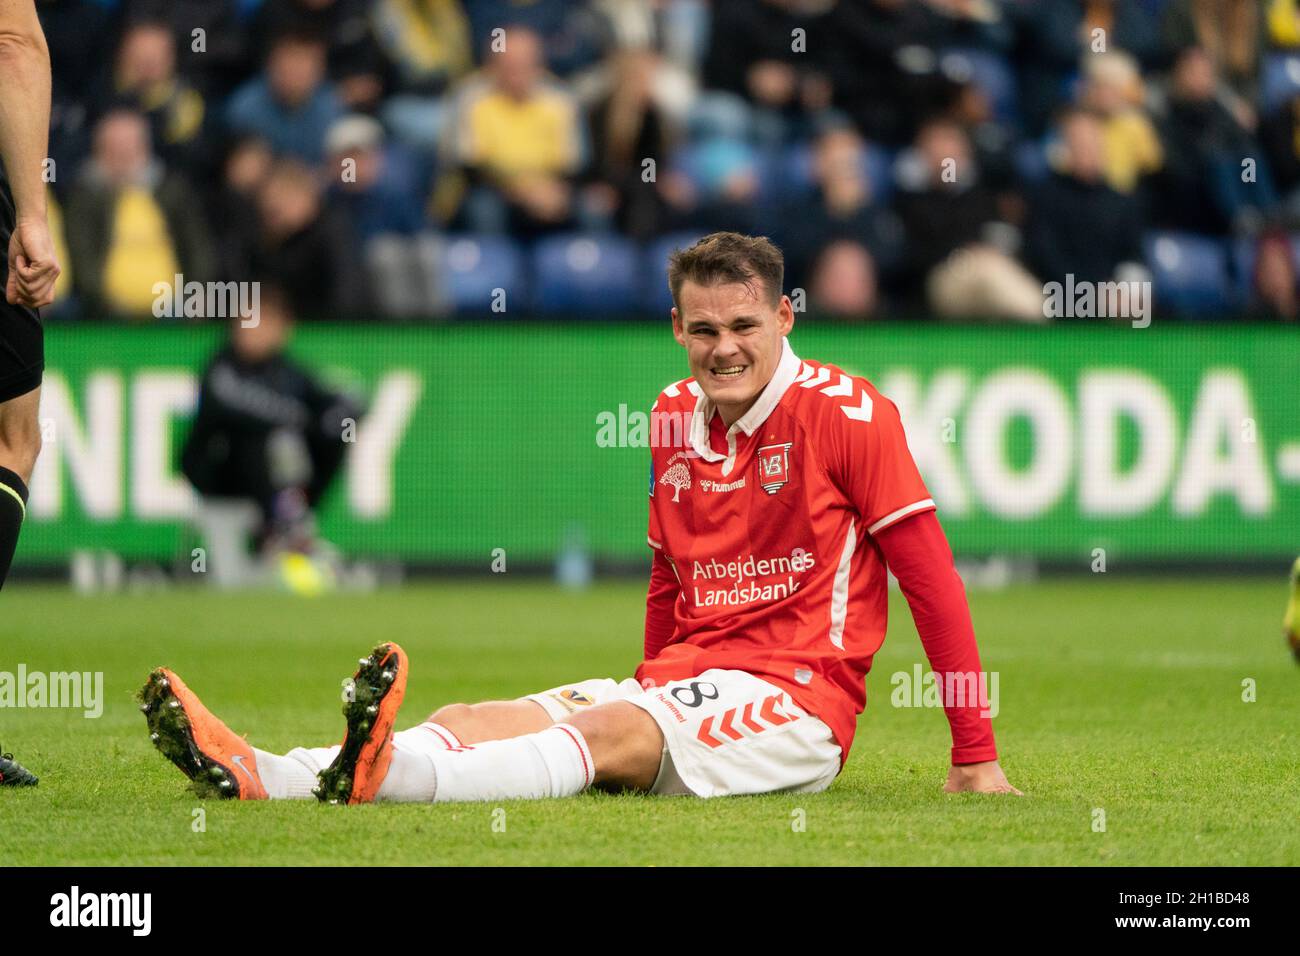 Brondby, Denmark. , . Lukas Engel (8) of Vejle Boldklub seen during the 3F Superliga match between Broendby IF and Vejle Boldklub at Brondby Stadion. (Photo Credit: Gonzales Photo/Alamy Live News Stock Photo